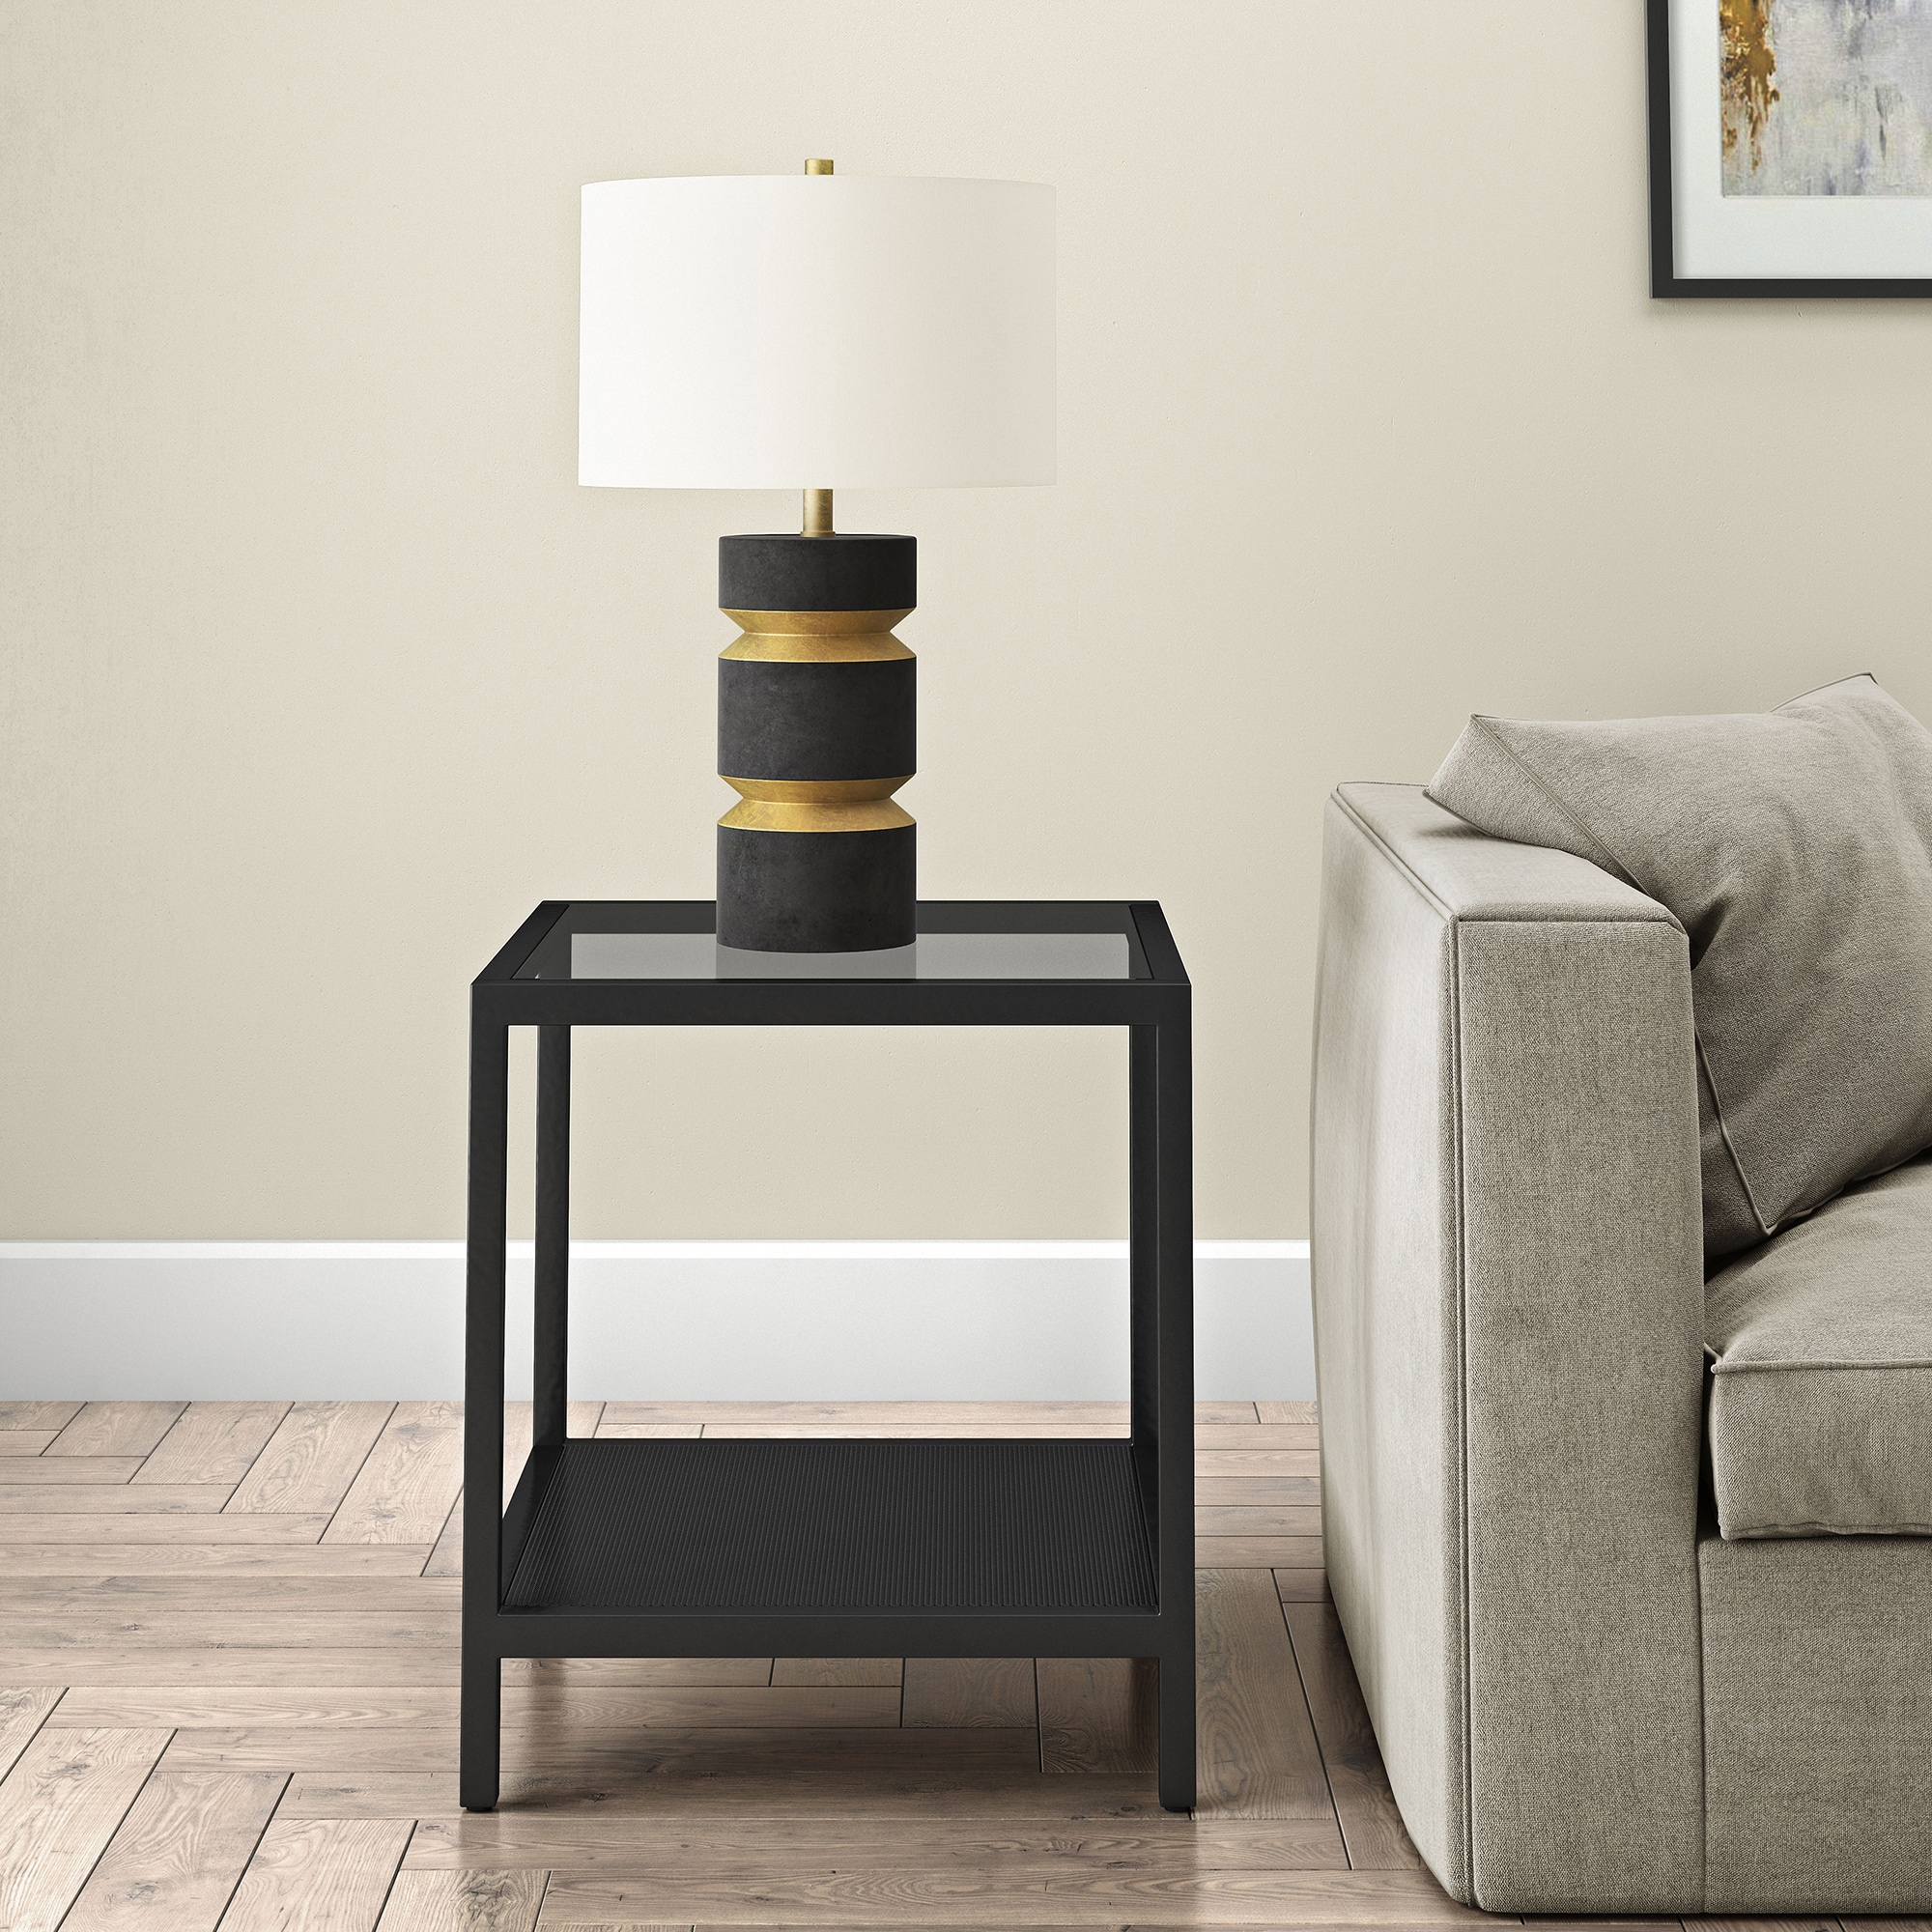 Hailey Home Rigan 20-in W x 22-in H Blackened Bronze Glass End Table ...